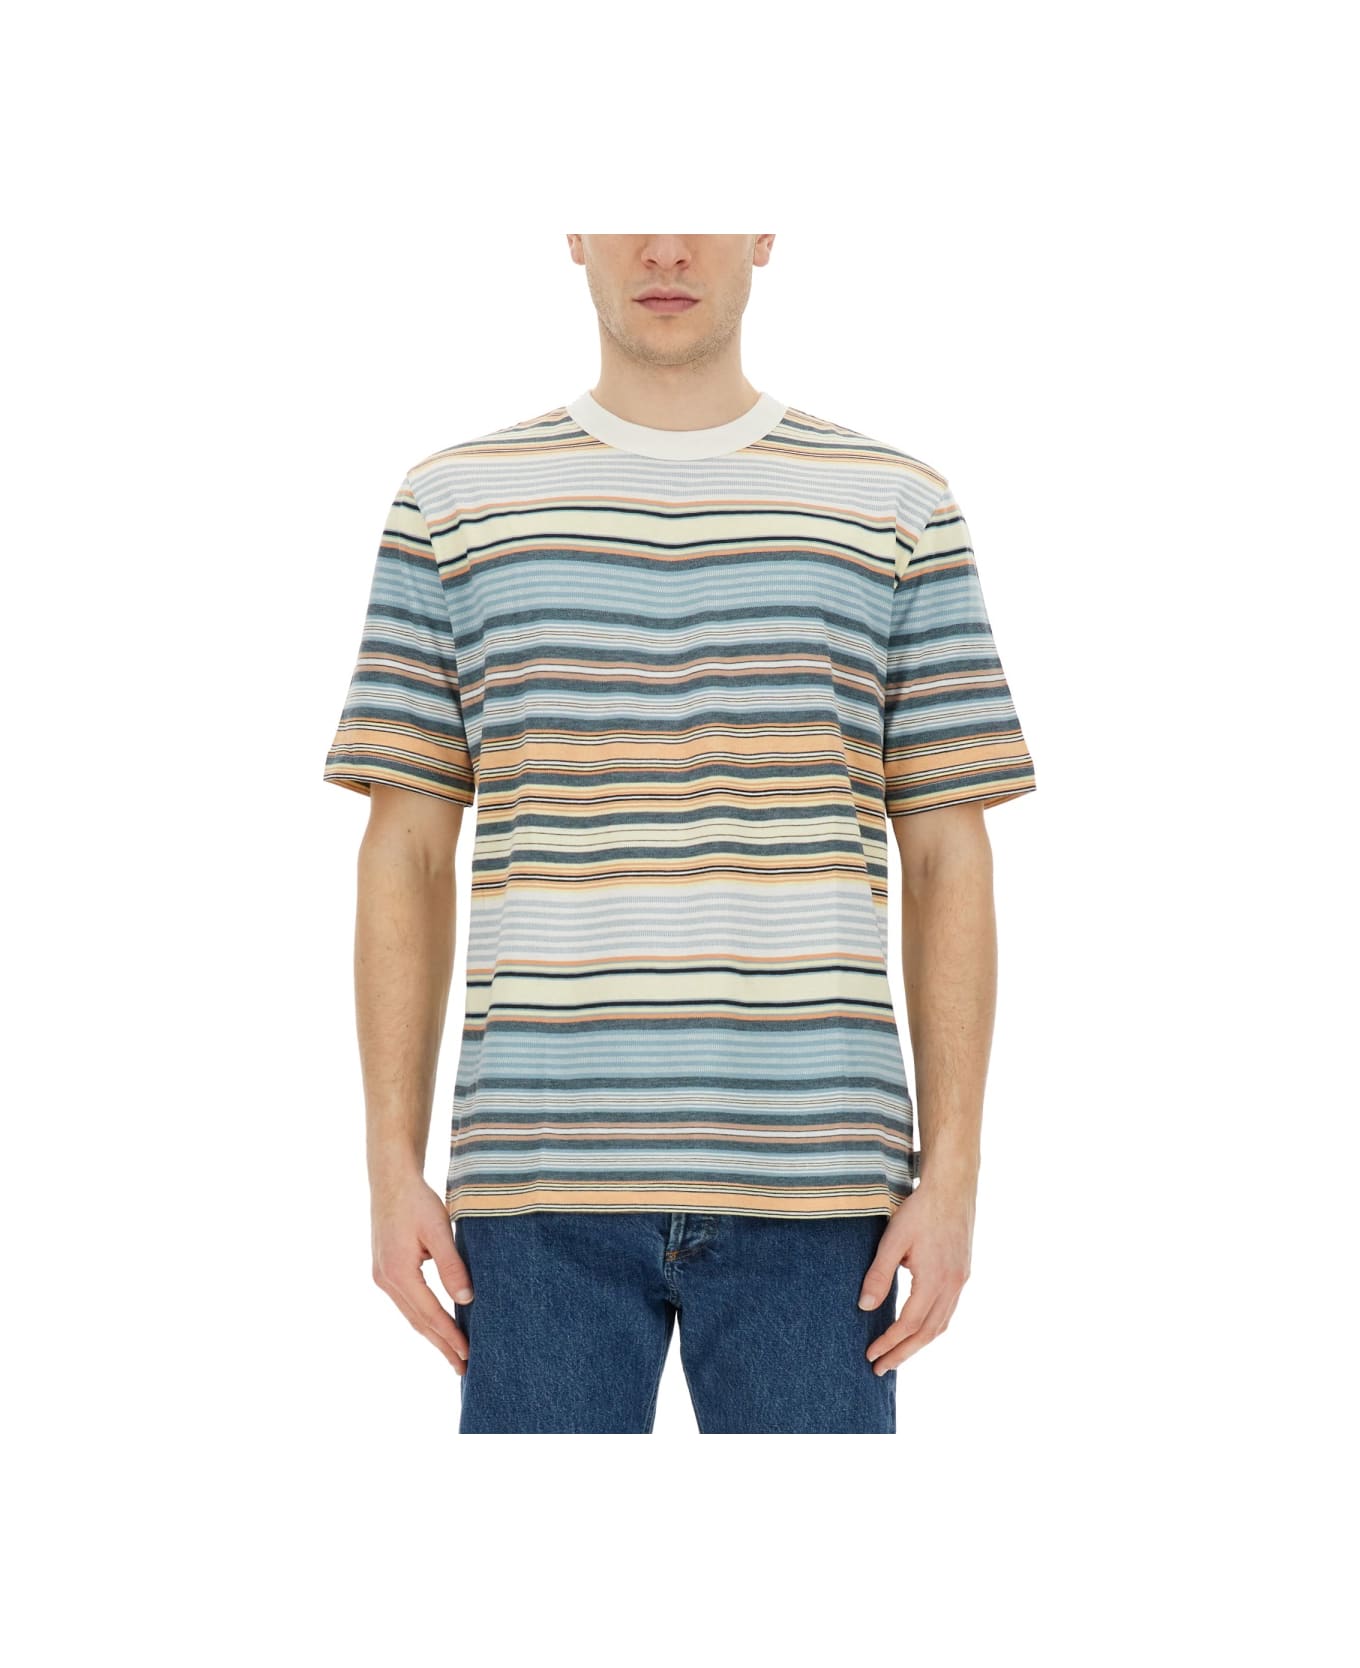 PS by Paul Smith Striped T-shirt - MULTICOLOUR